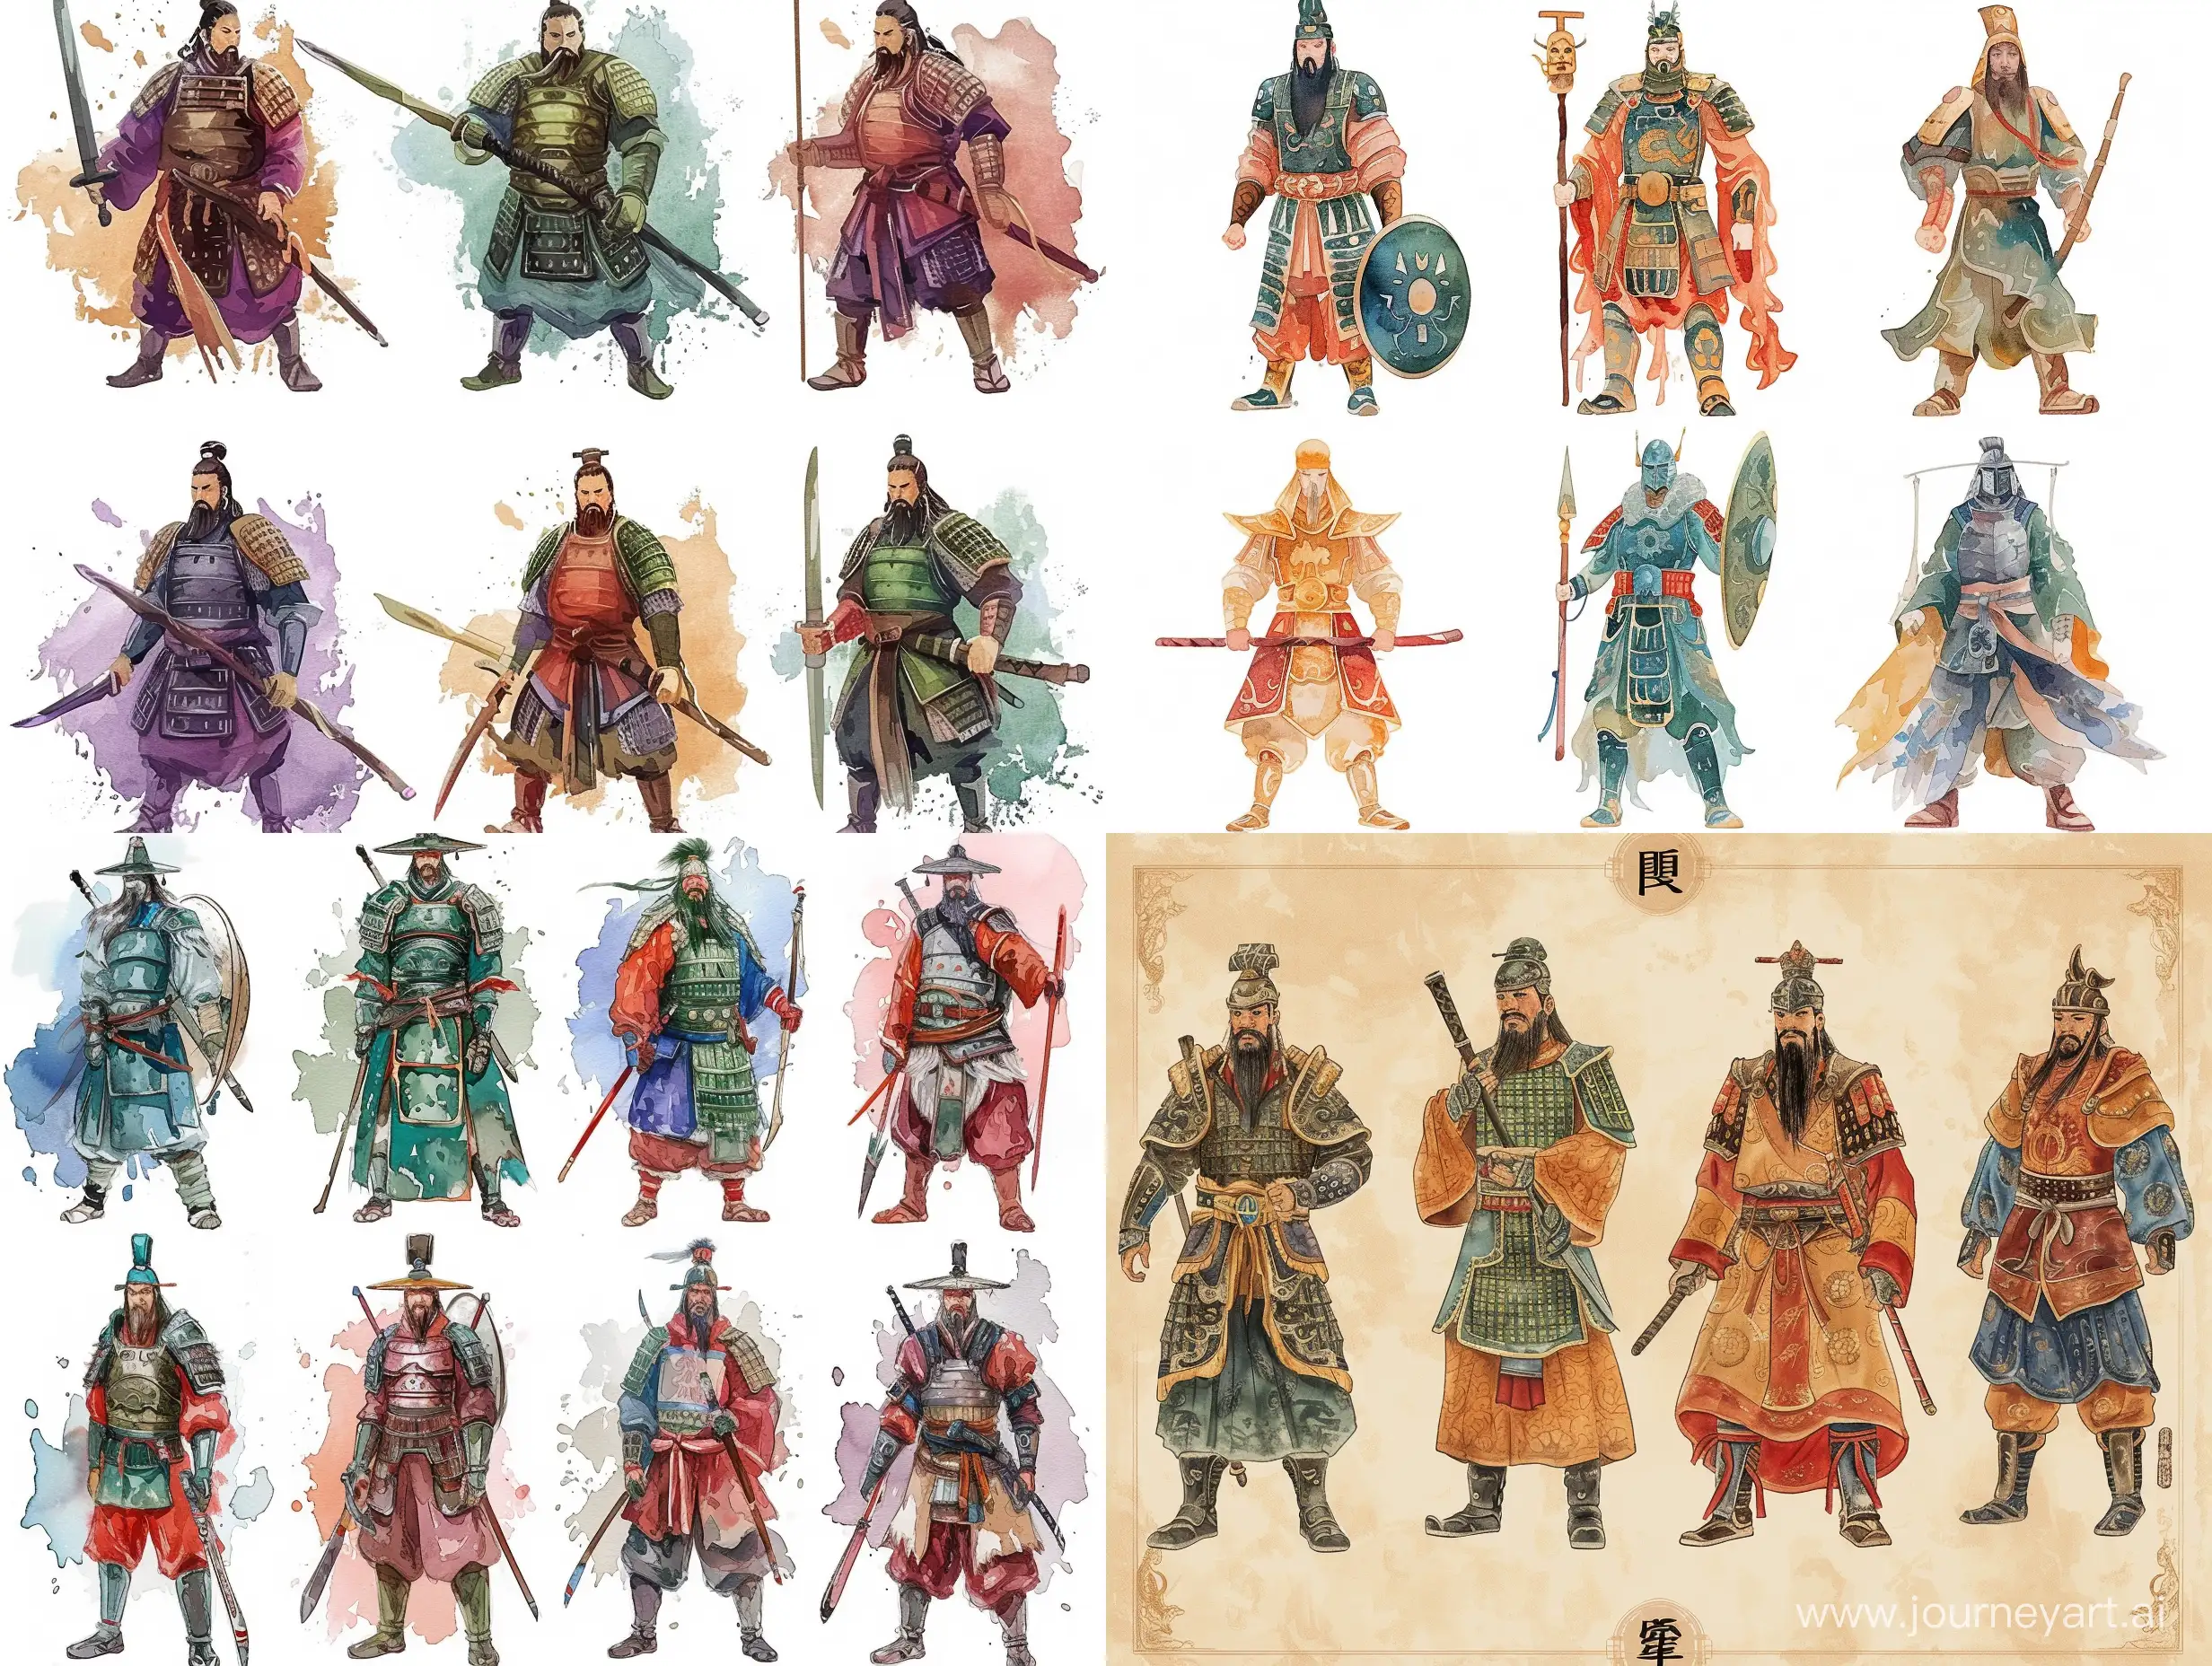 Six-Stylized-Caricatures-of-Ancient-Chinese-Warriors-in-Decorative-Watercolor-by-Victor-Ngai